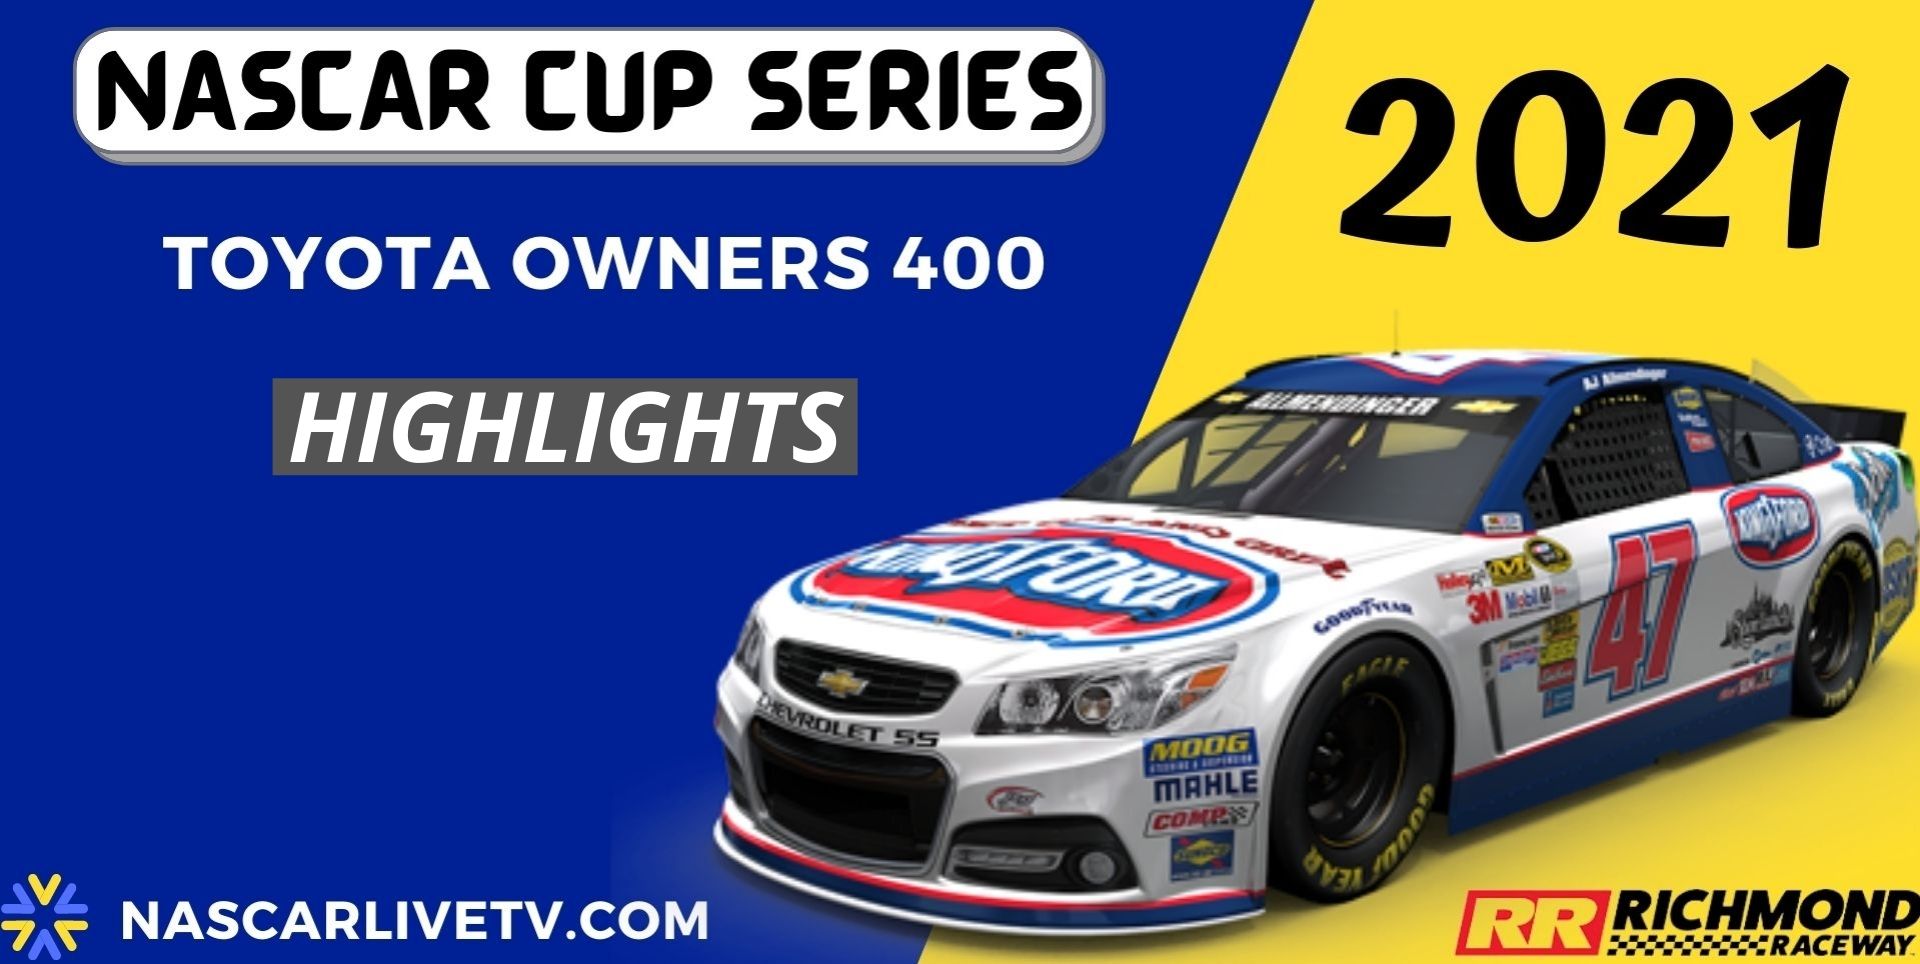 Toyota Owners 400 NASCAR Cup Series Highlights 2021